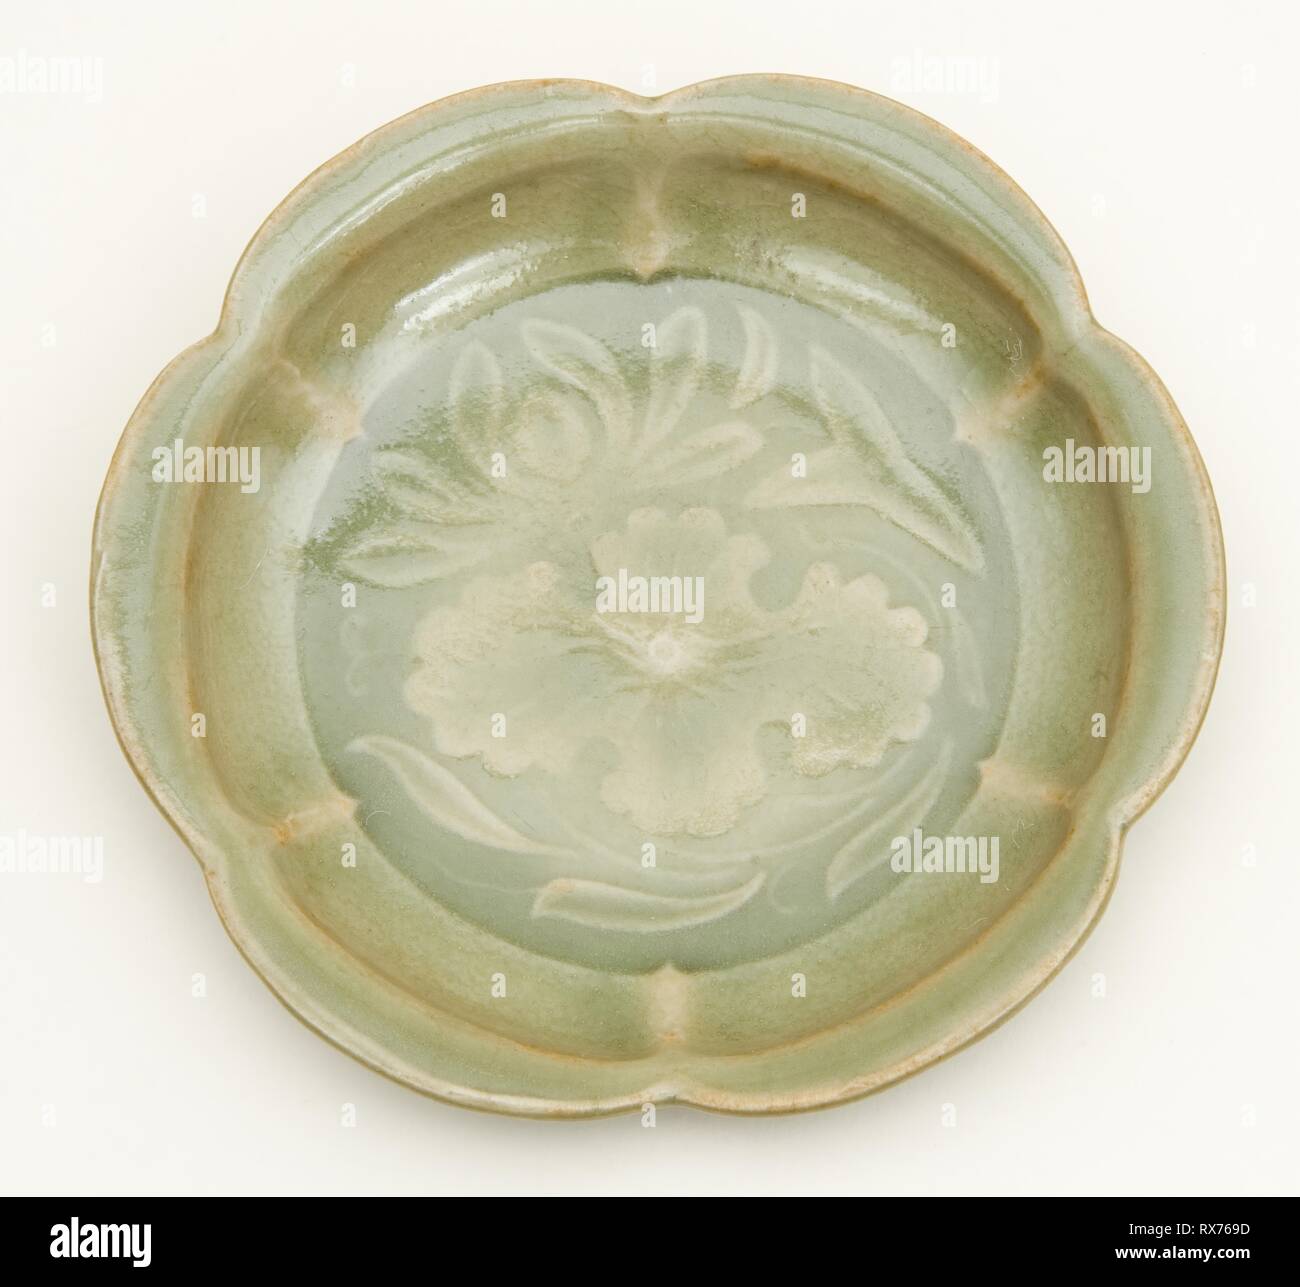 Dish with Petal-Lobed Rim, Lotus, and Waterweeds. China. Date: 1000-1127. Dimensions: H. 2.8 cm (1 1/8 in.); diam. 10.9 cm (4 5/16 in.). Yaozhou ware; stoneware with underglaze molded decoration. Origin: China. Museum: The Chicago Art Institute. Stock Photo